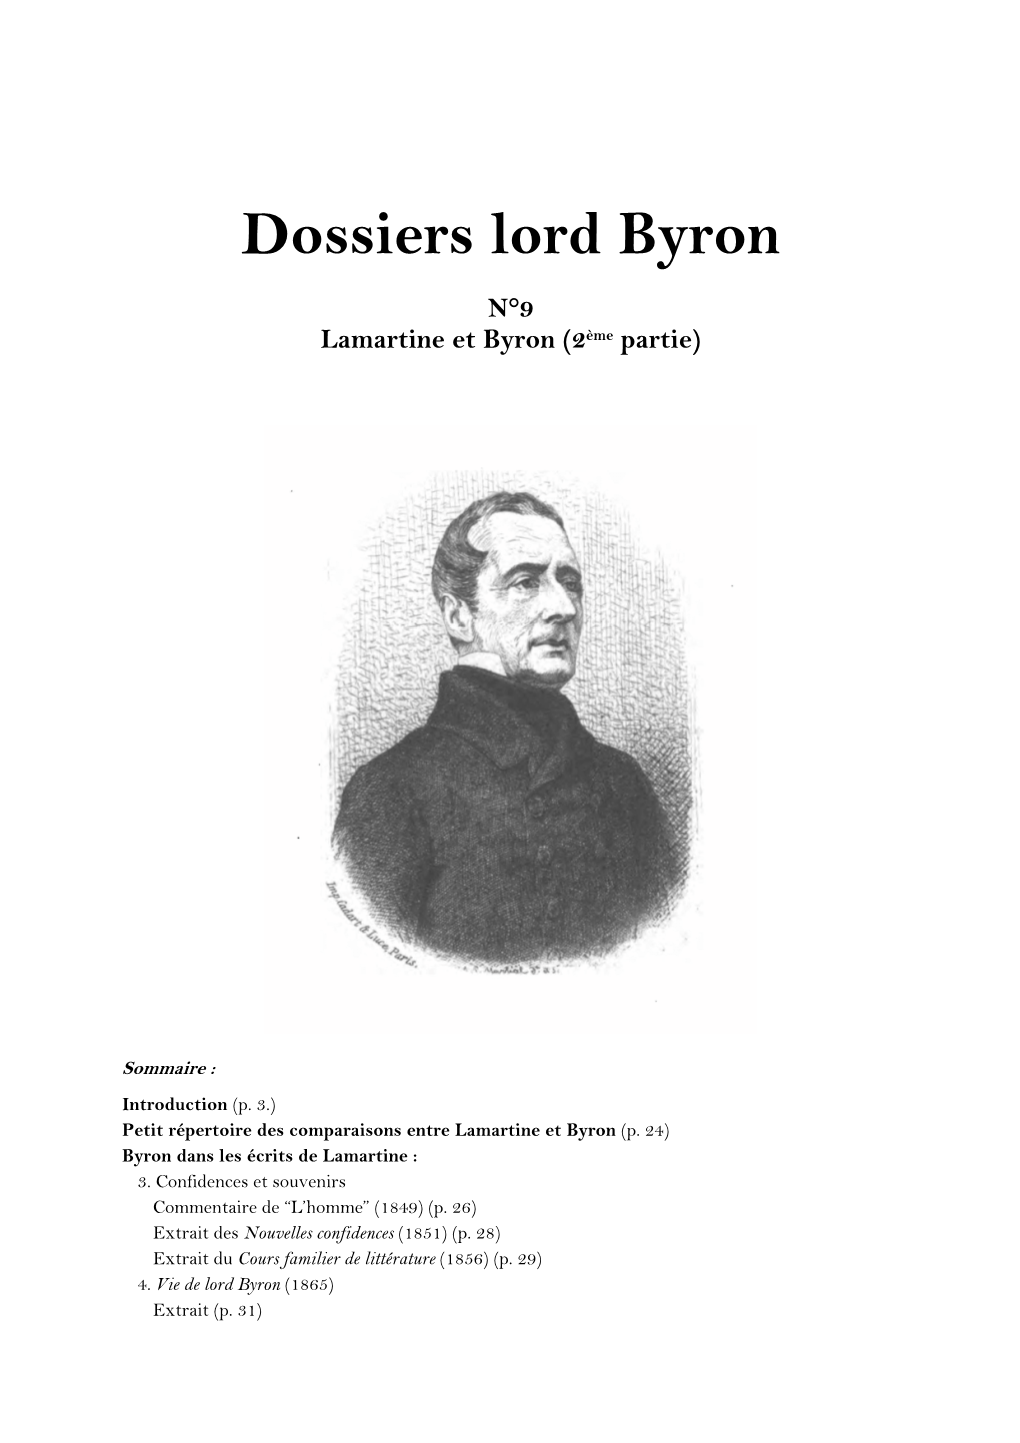 Dossiers Lord Byron